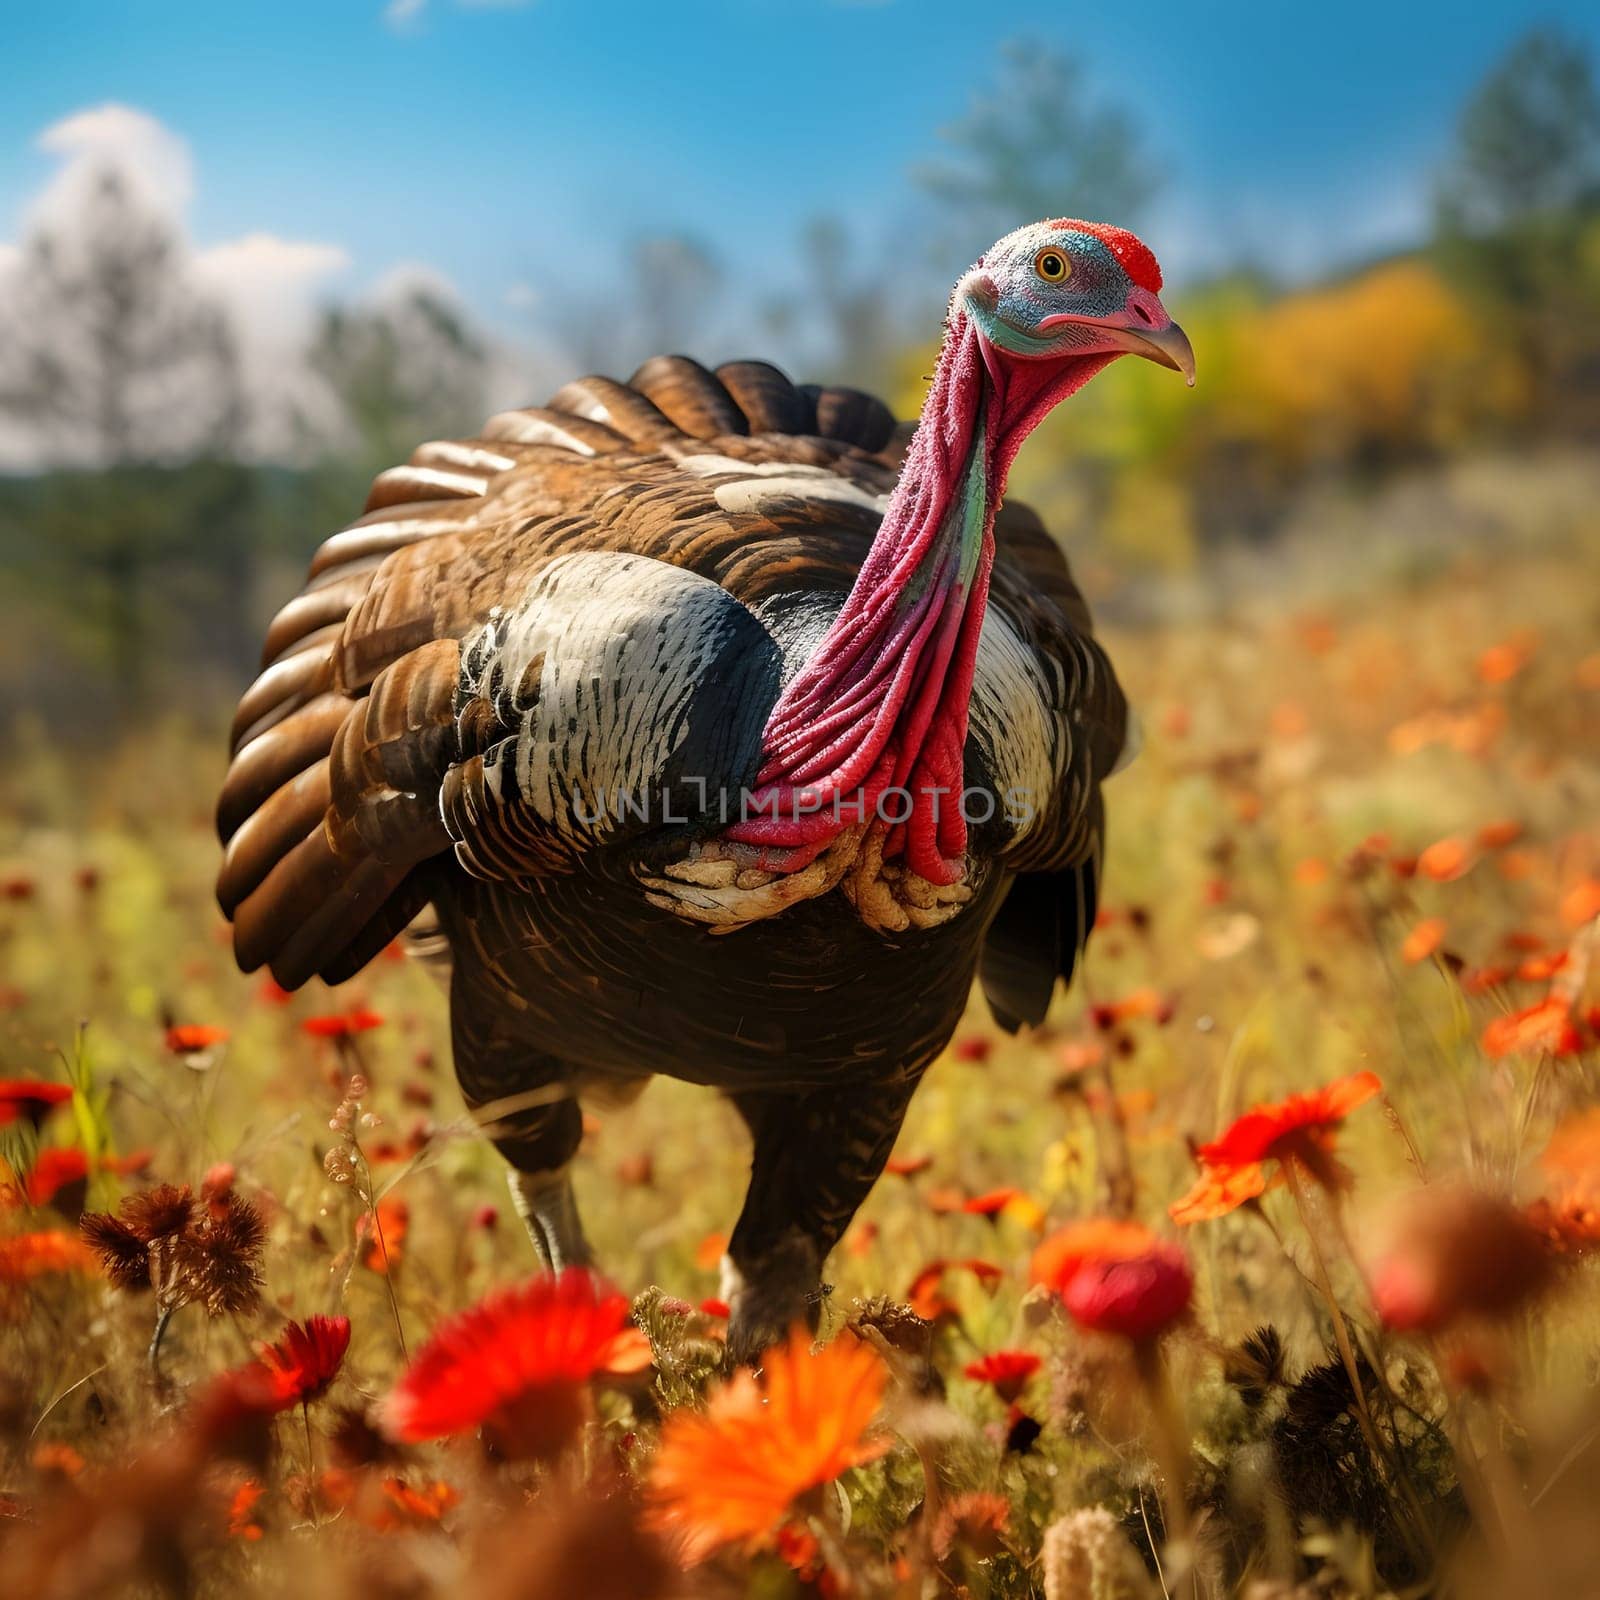 3D turkey in a flower meadow, blurred background, portrait. Turkey as the main dish of thanksgiving for the harvest. An atmosphere of joy and celebration.